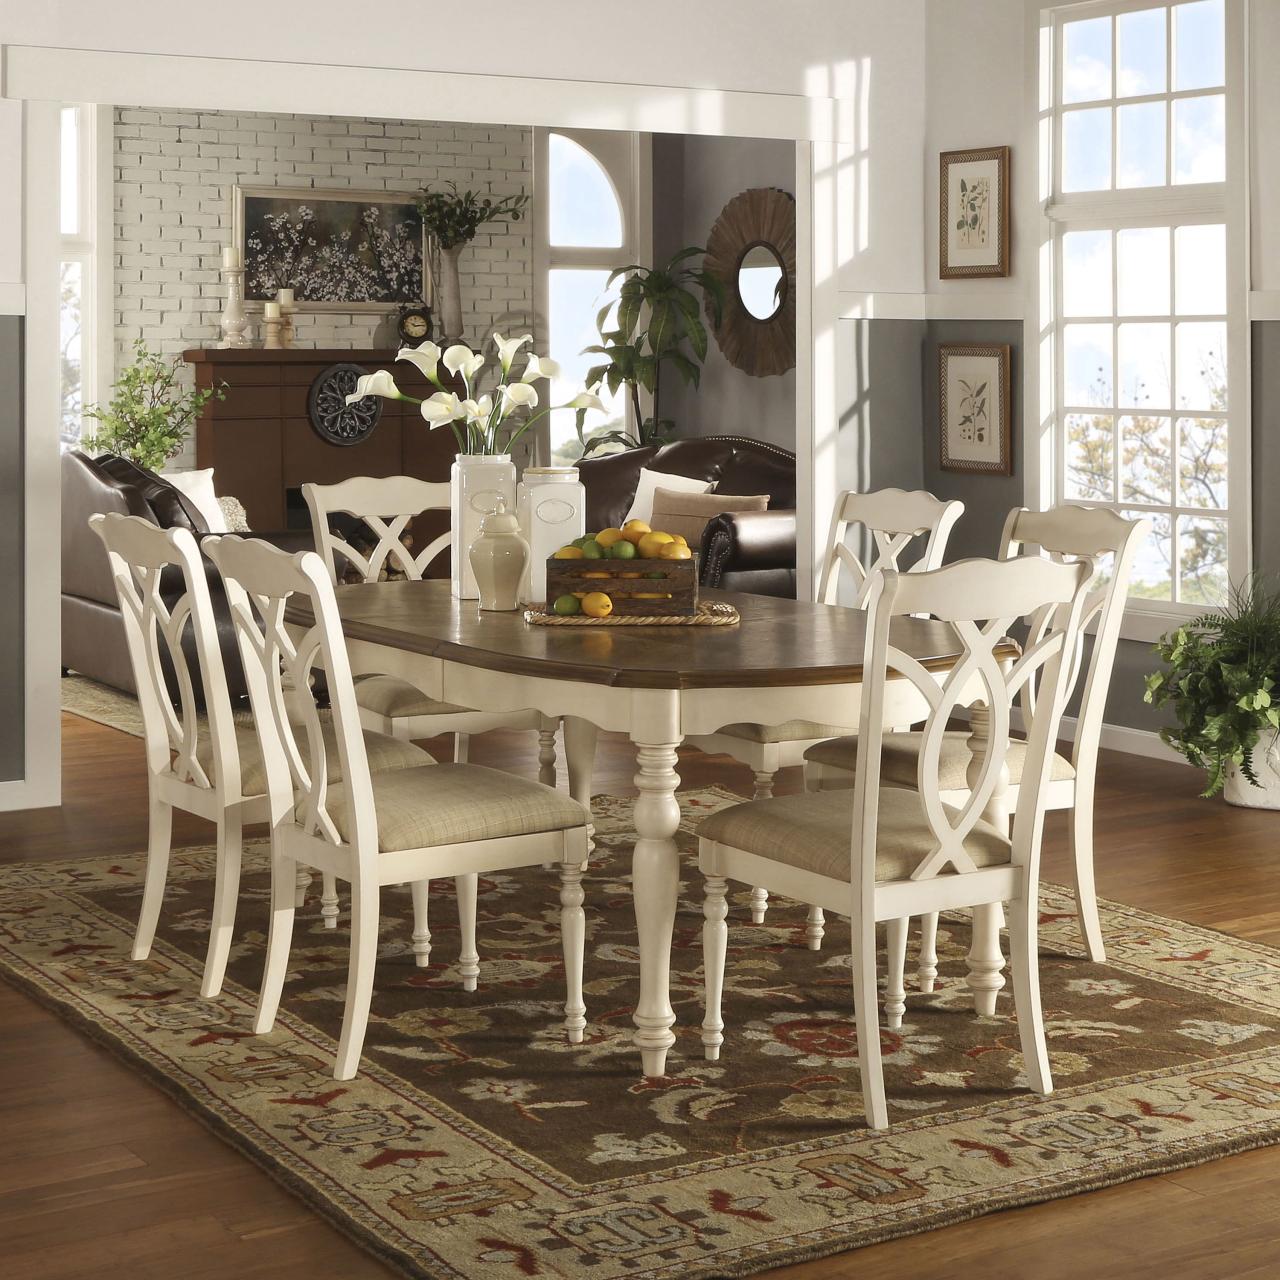 Overstock dining room sets